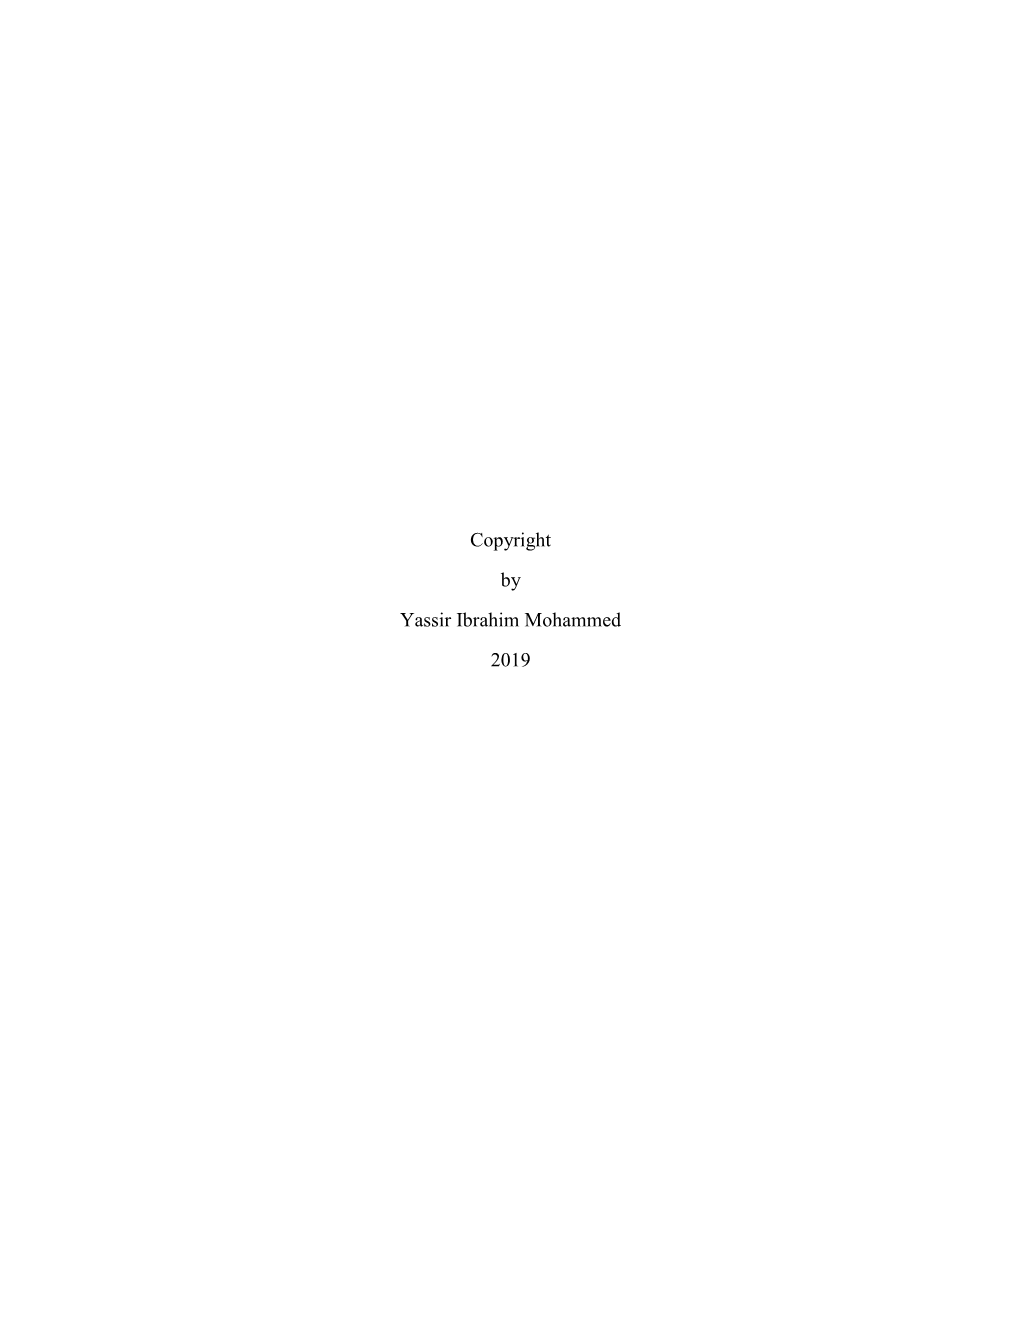 MOHAMMED-THESIS-2019.Pdf (660.4Kb)